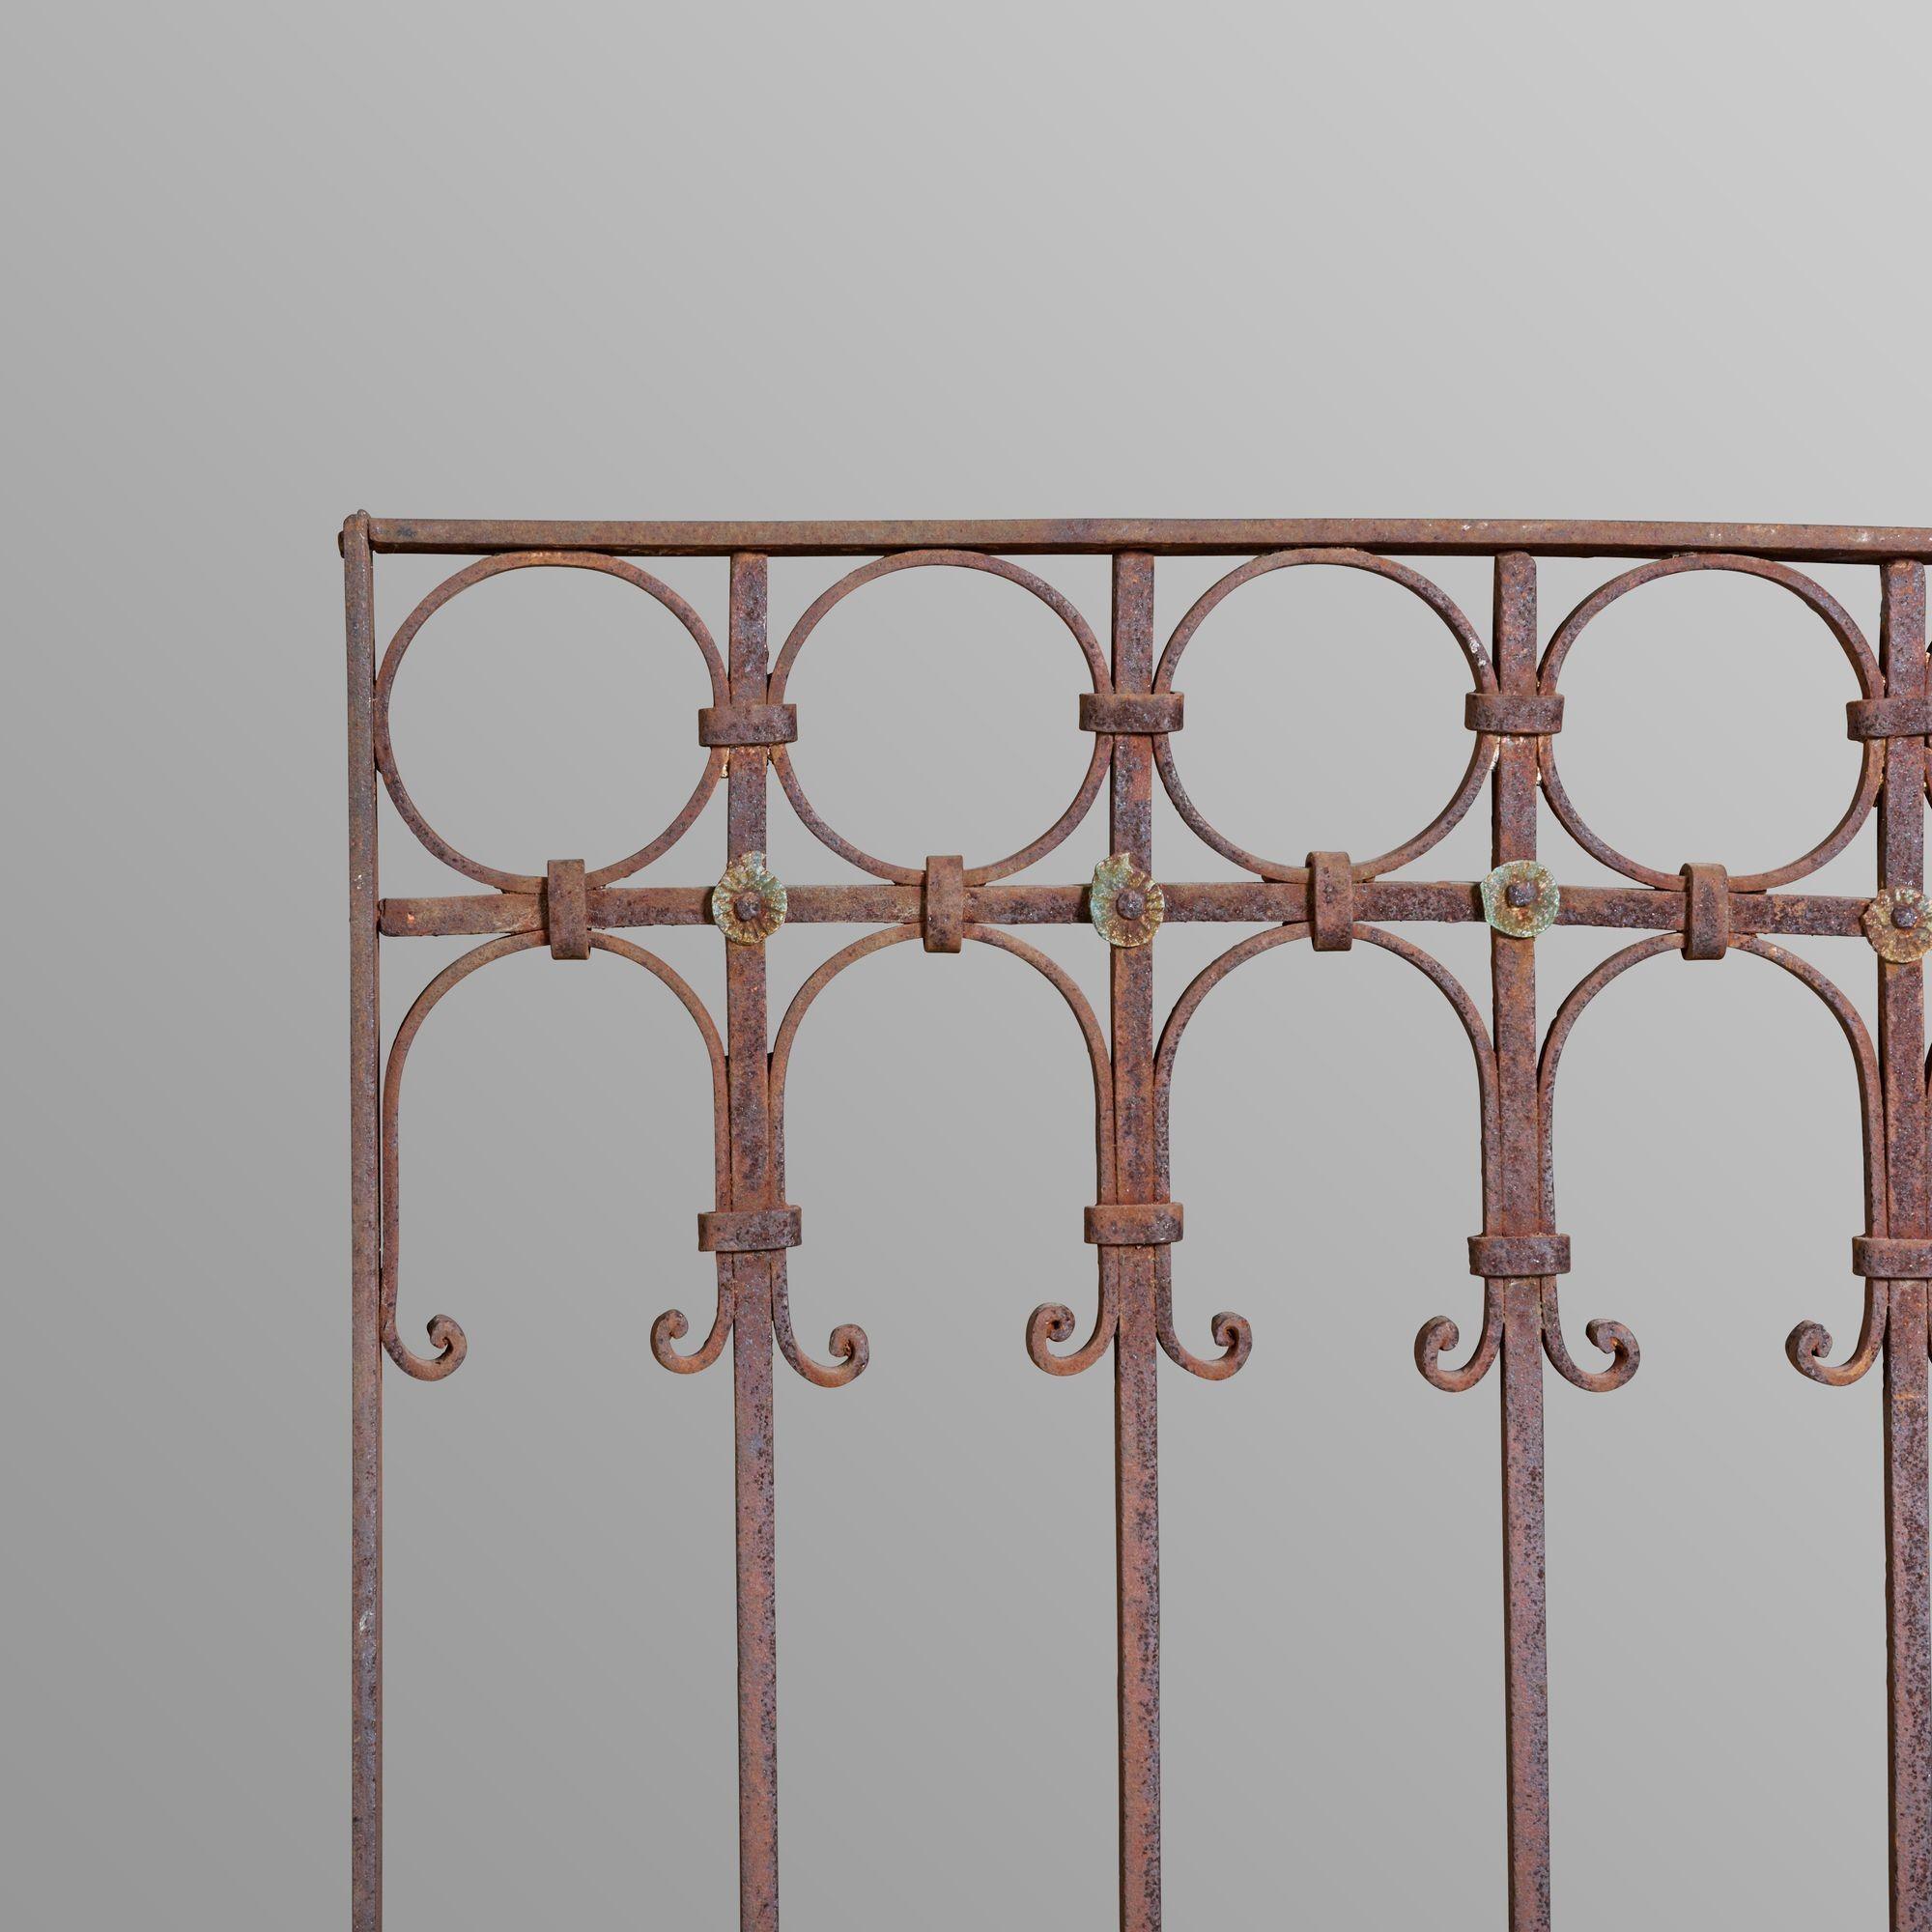 Decorative wrought iron grill.